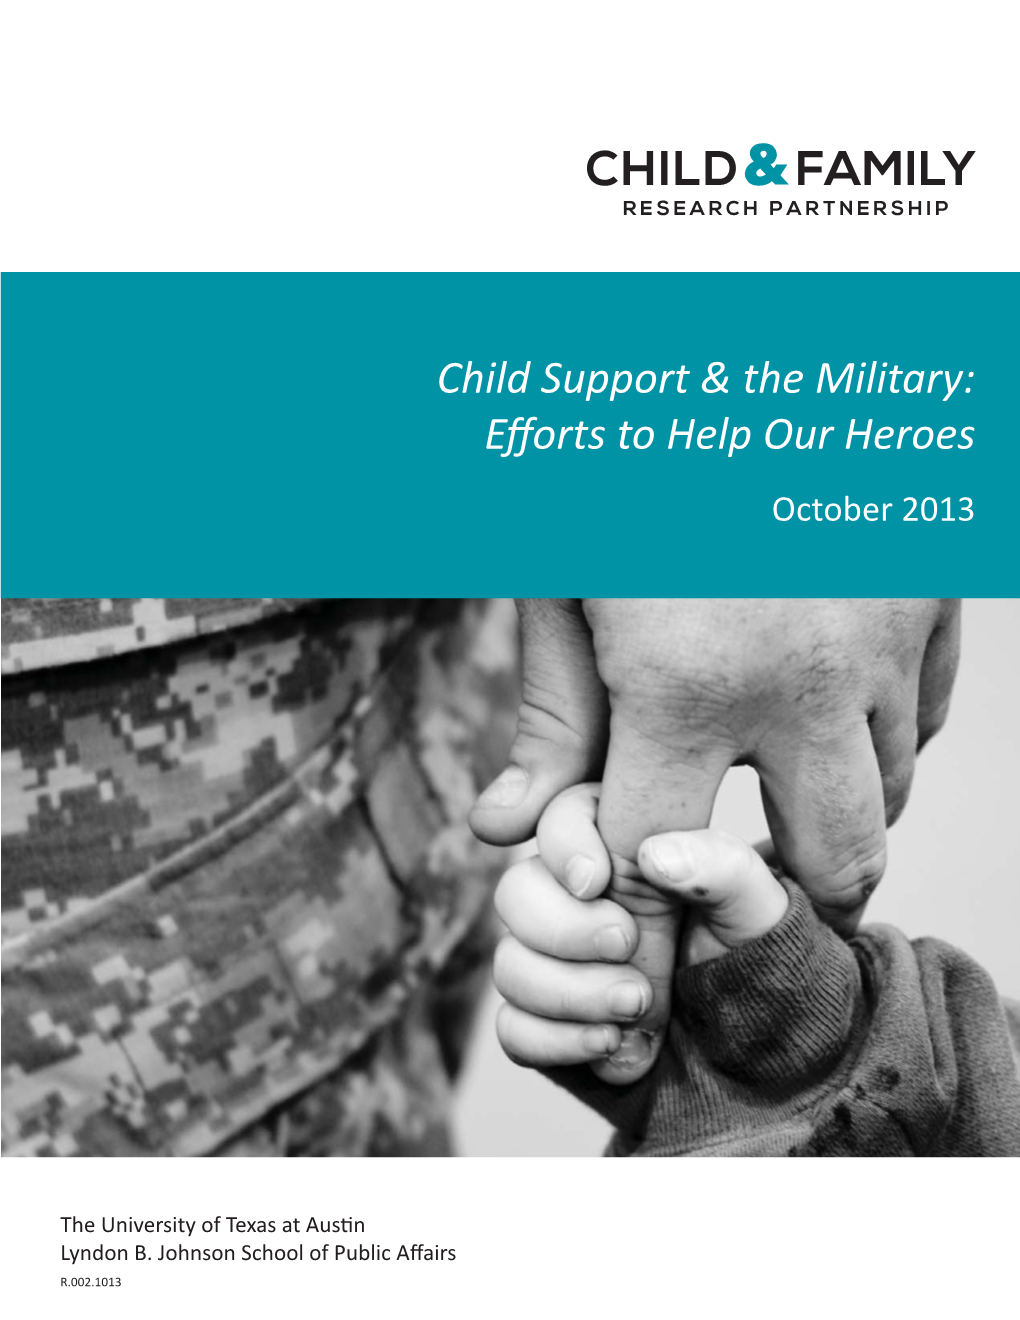 Child Support & the Military